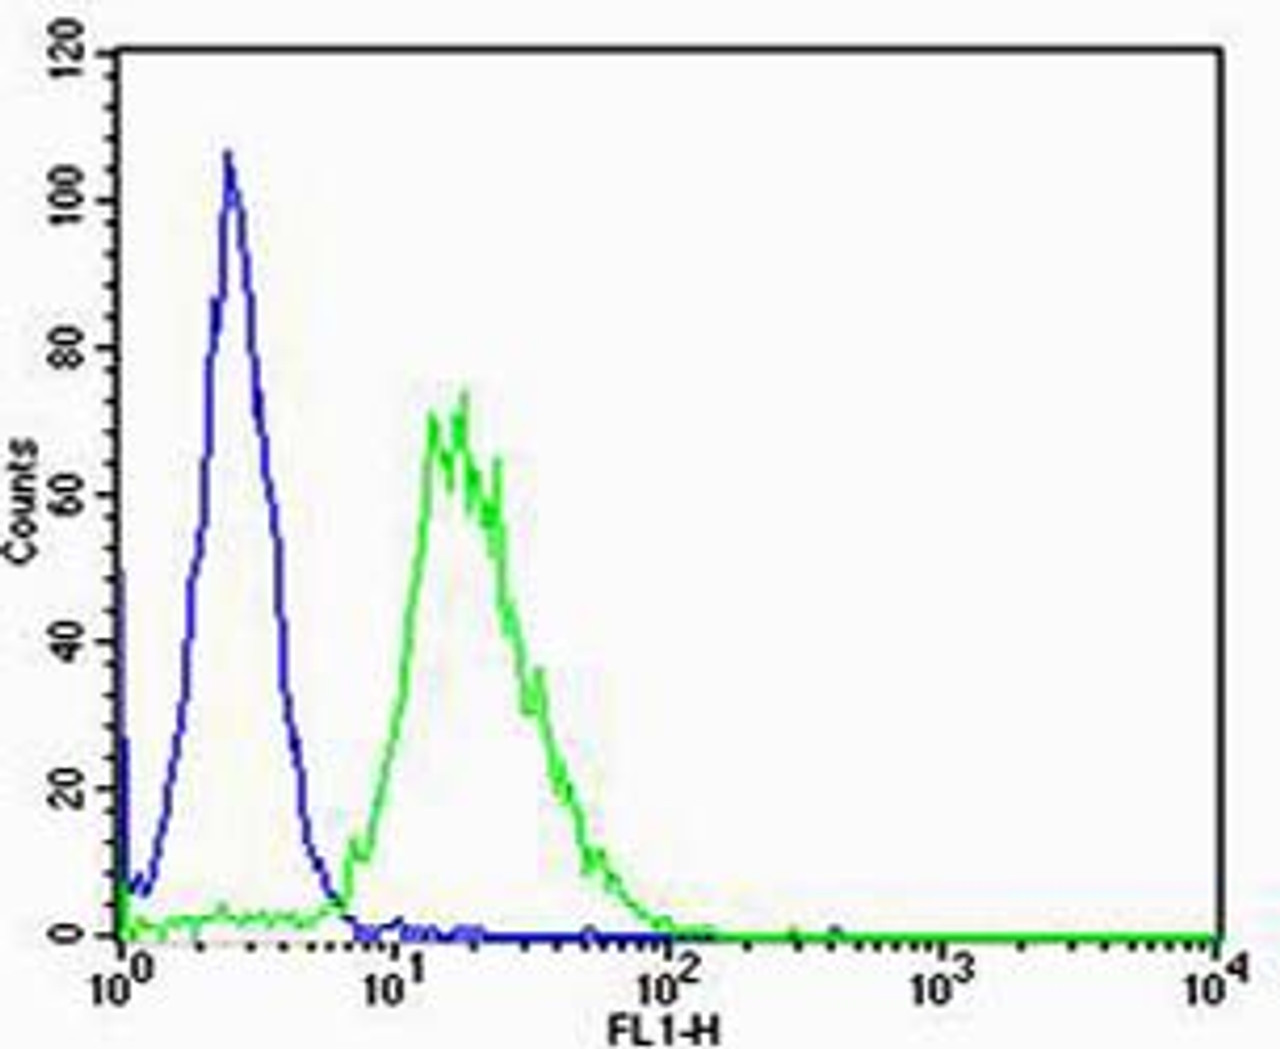 Flow cytometric analysis of NIH/3T3 cells using Mouse Csnk1g3 Antibody (green) compared to an isotype control of rabbit IgG (blue) . Antibody was diluted at 1:25 dilution. An Alexa Fluor 488 goat anti-rabbit lgG at 1:400 dilution was used as the secondary antibody.